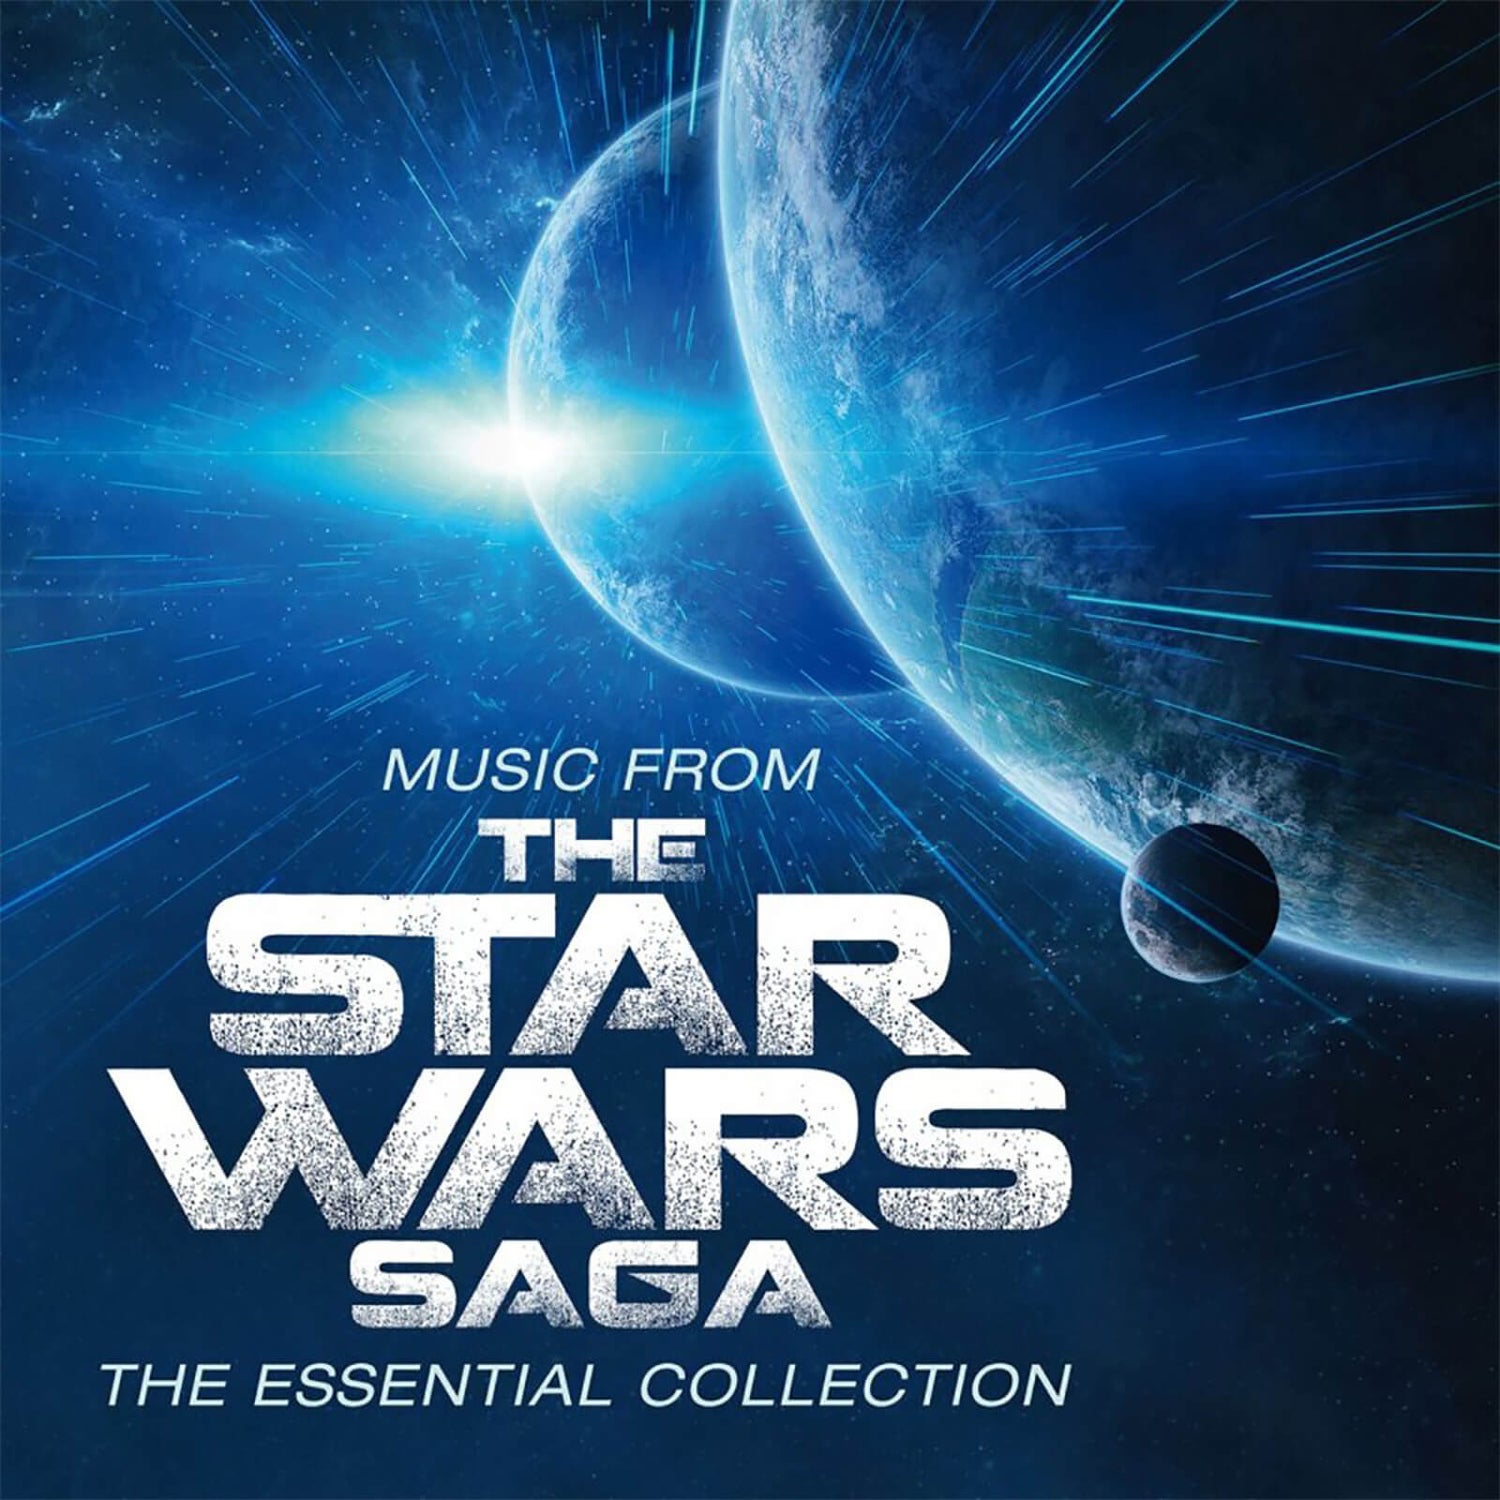 Music On Vinyl - Music From The Star Wars Saga: The Essential Collection (Soundtrack) Vinyl 2LP